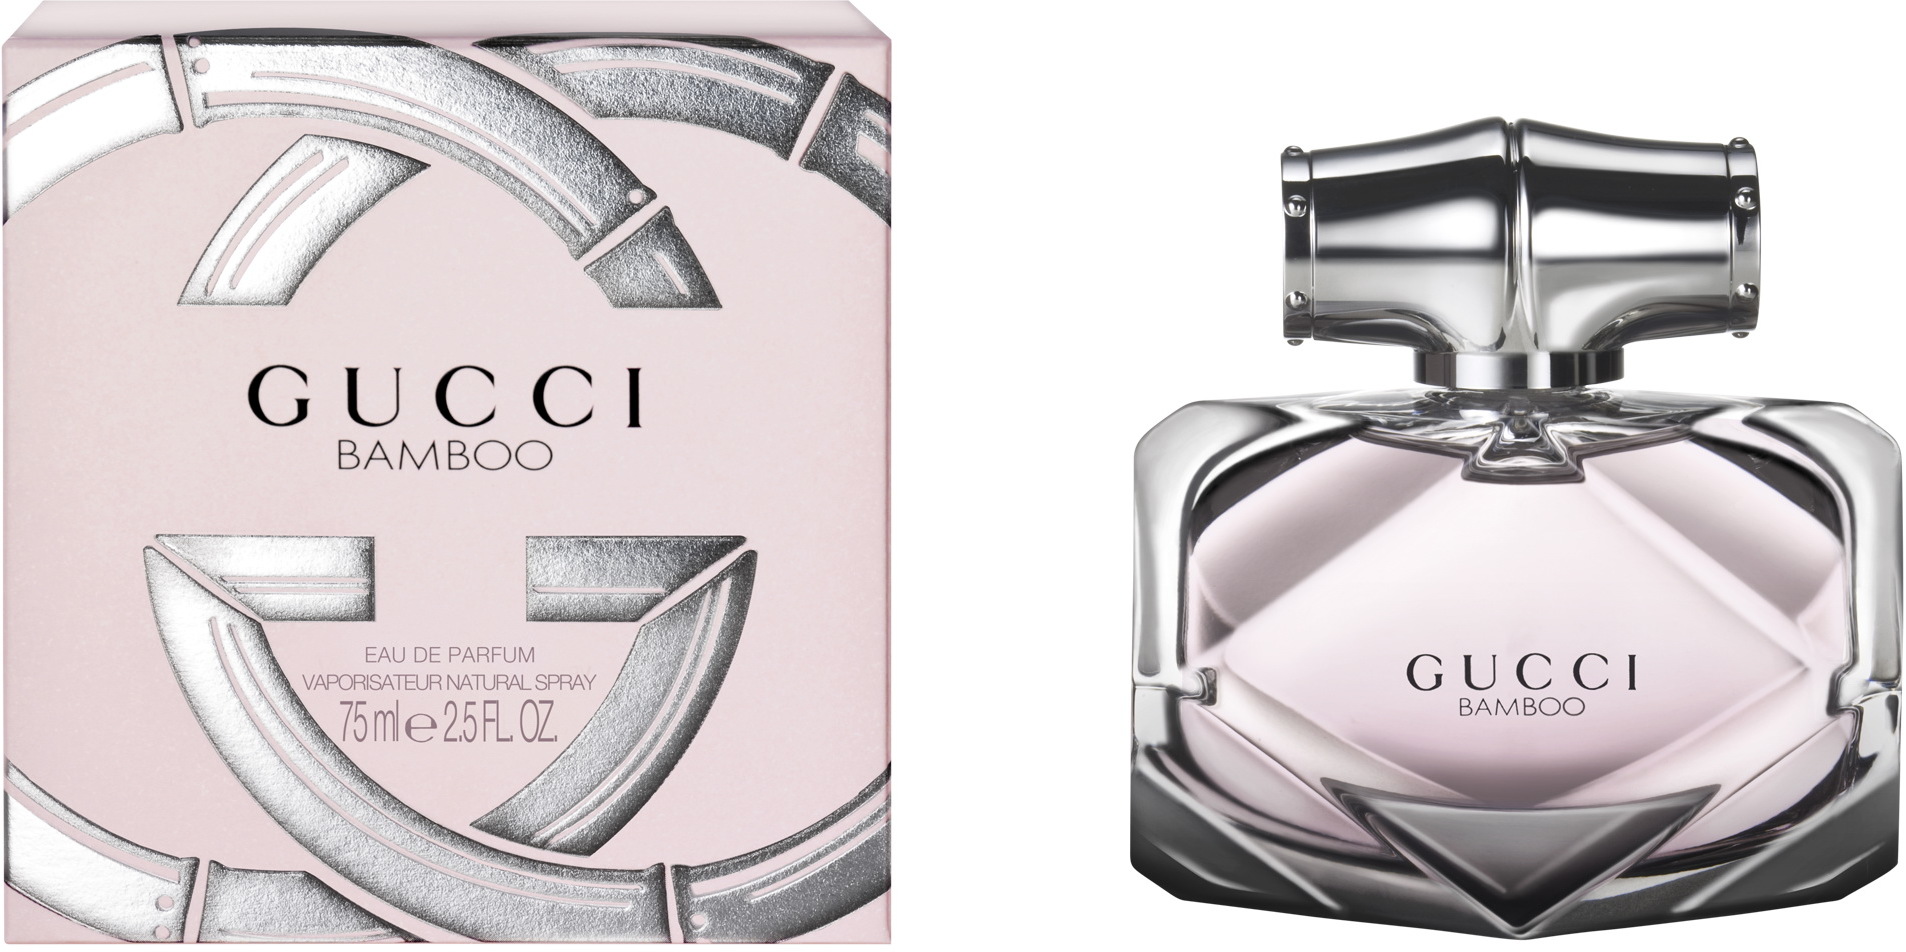 Gucci Bamboo EdP 75ml in duty-free at 